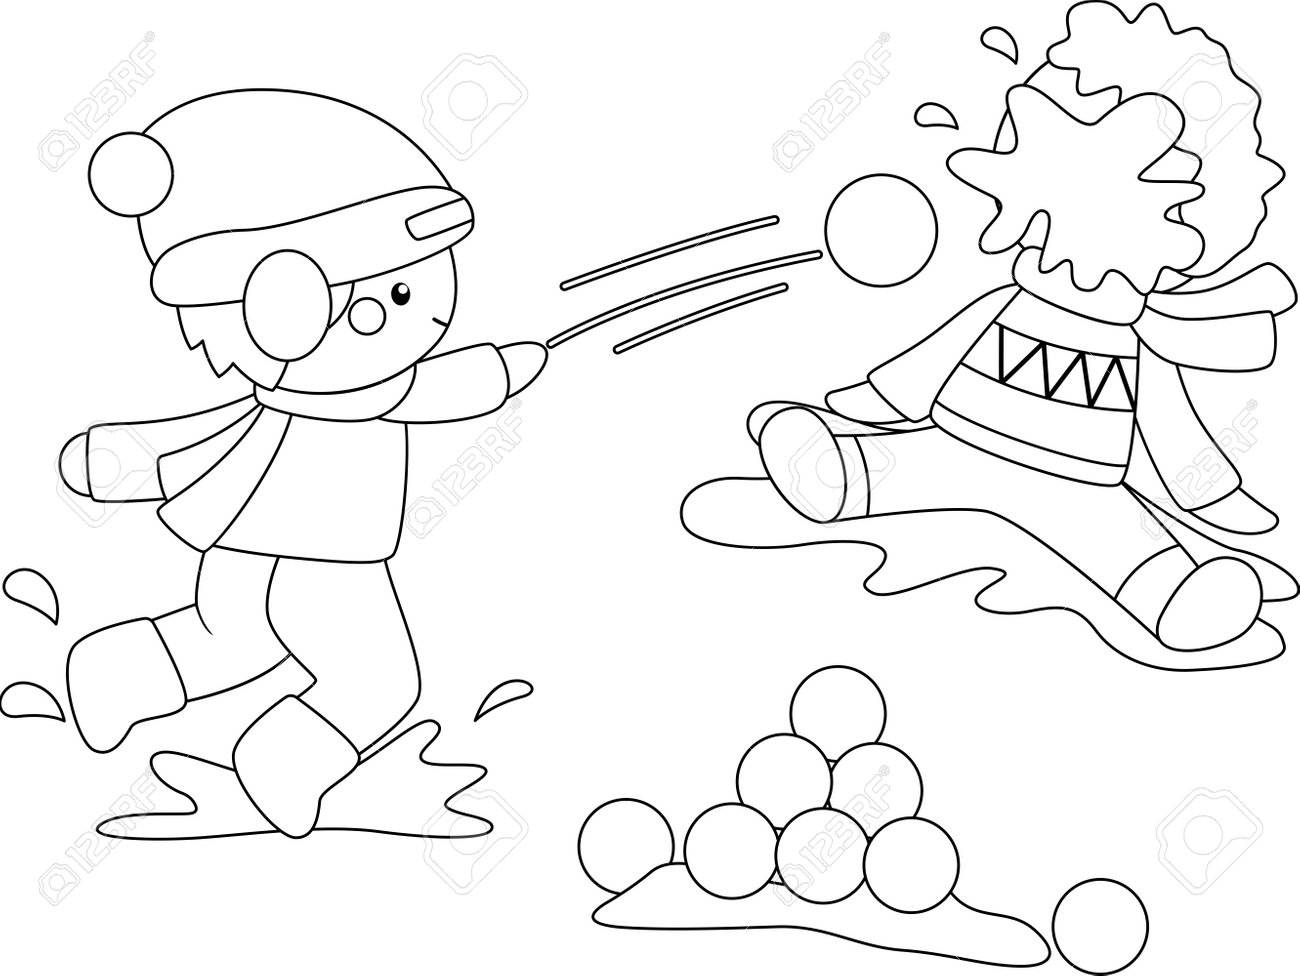 A vector of kids having snowball fight in black and white coloring royalty free svg cliparts vectors and stock illustration image